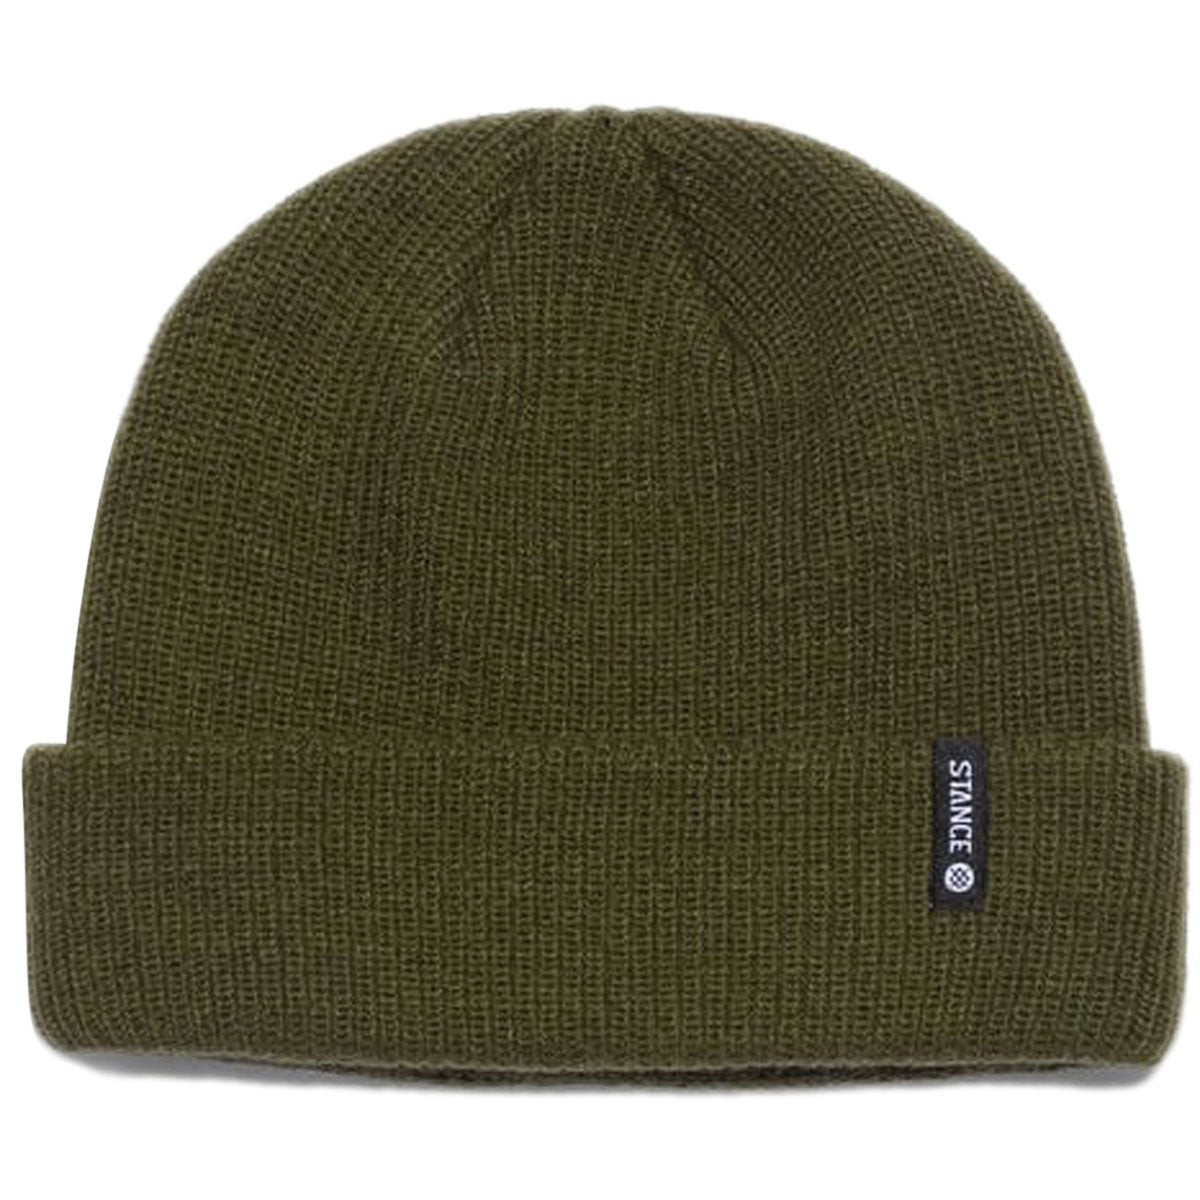 Stance Icon 2 Beanie - Olive image 1